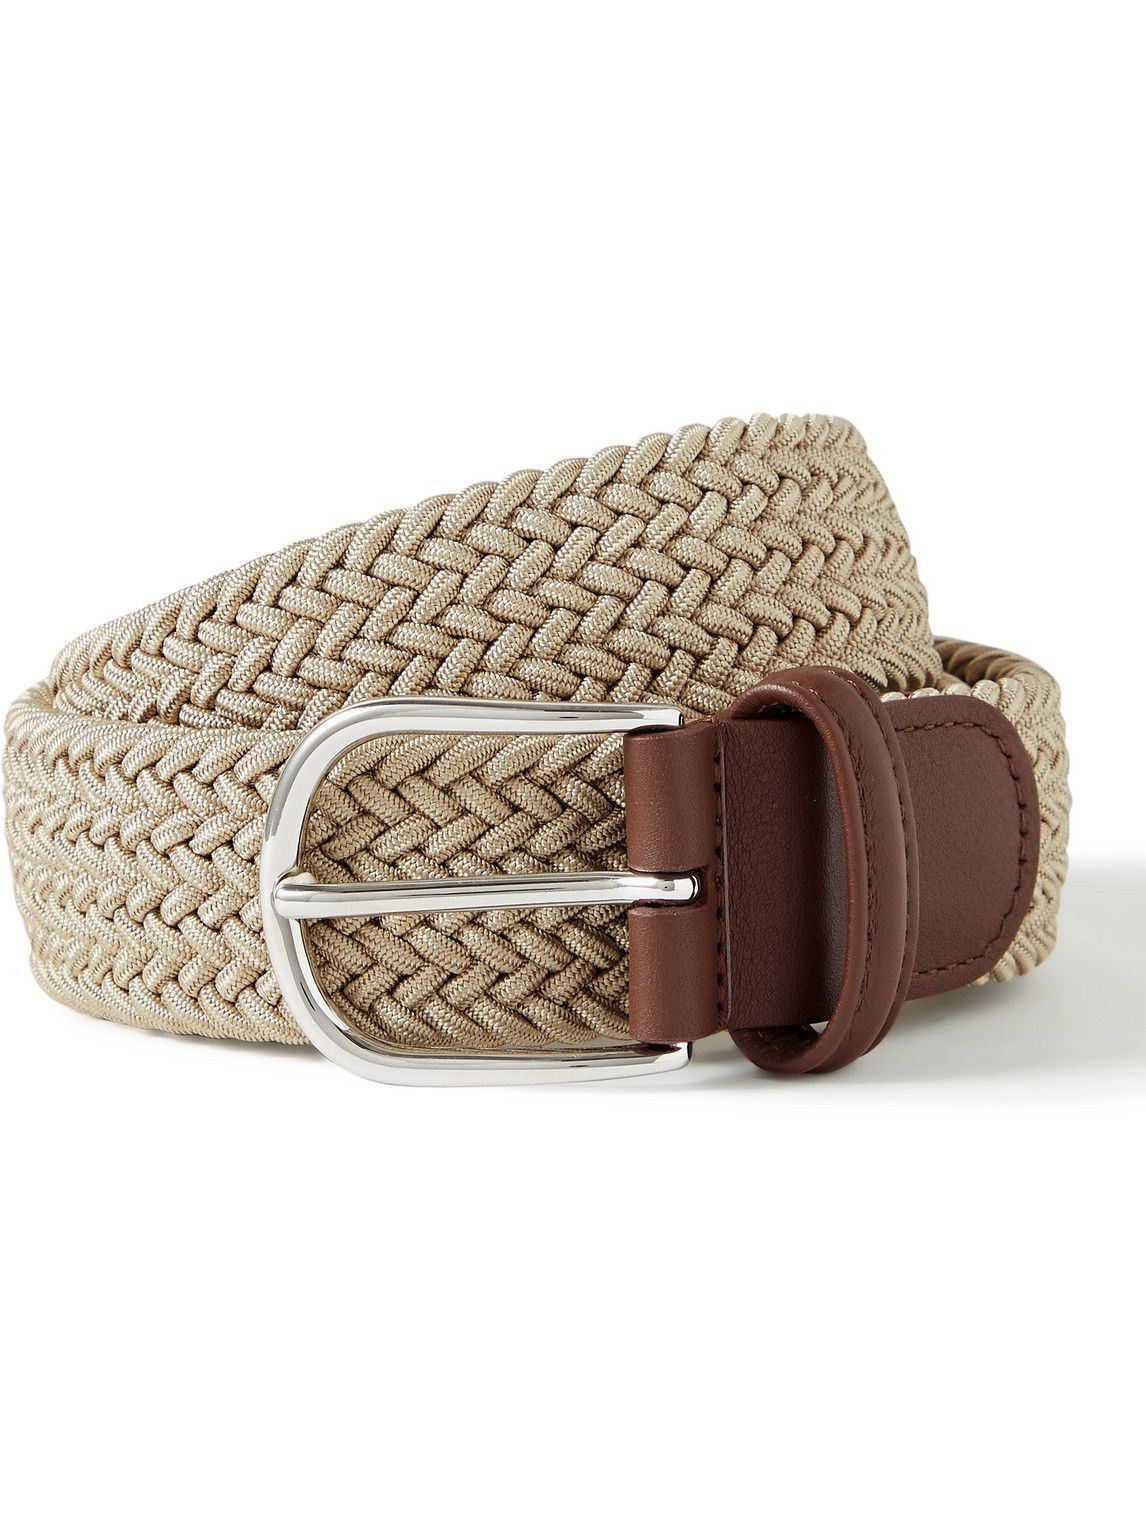 Anderson's - 3.5cm Leather-Trimmed Woven Elastic Belt - Neutrals Anderson's